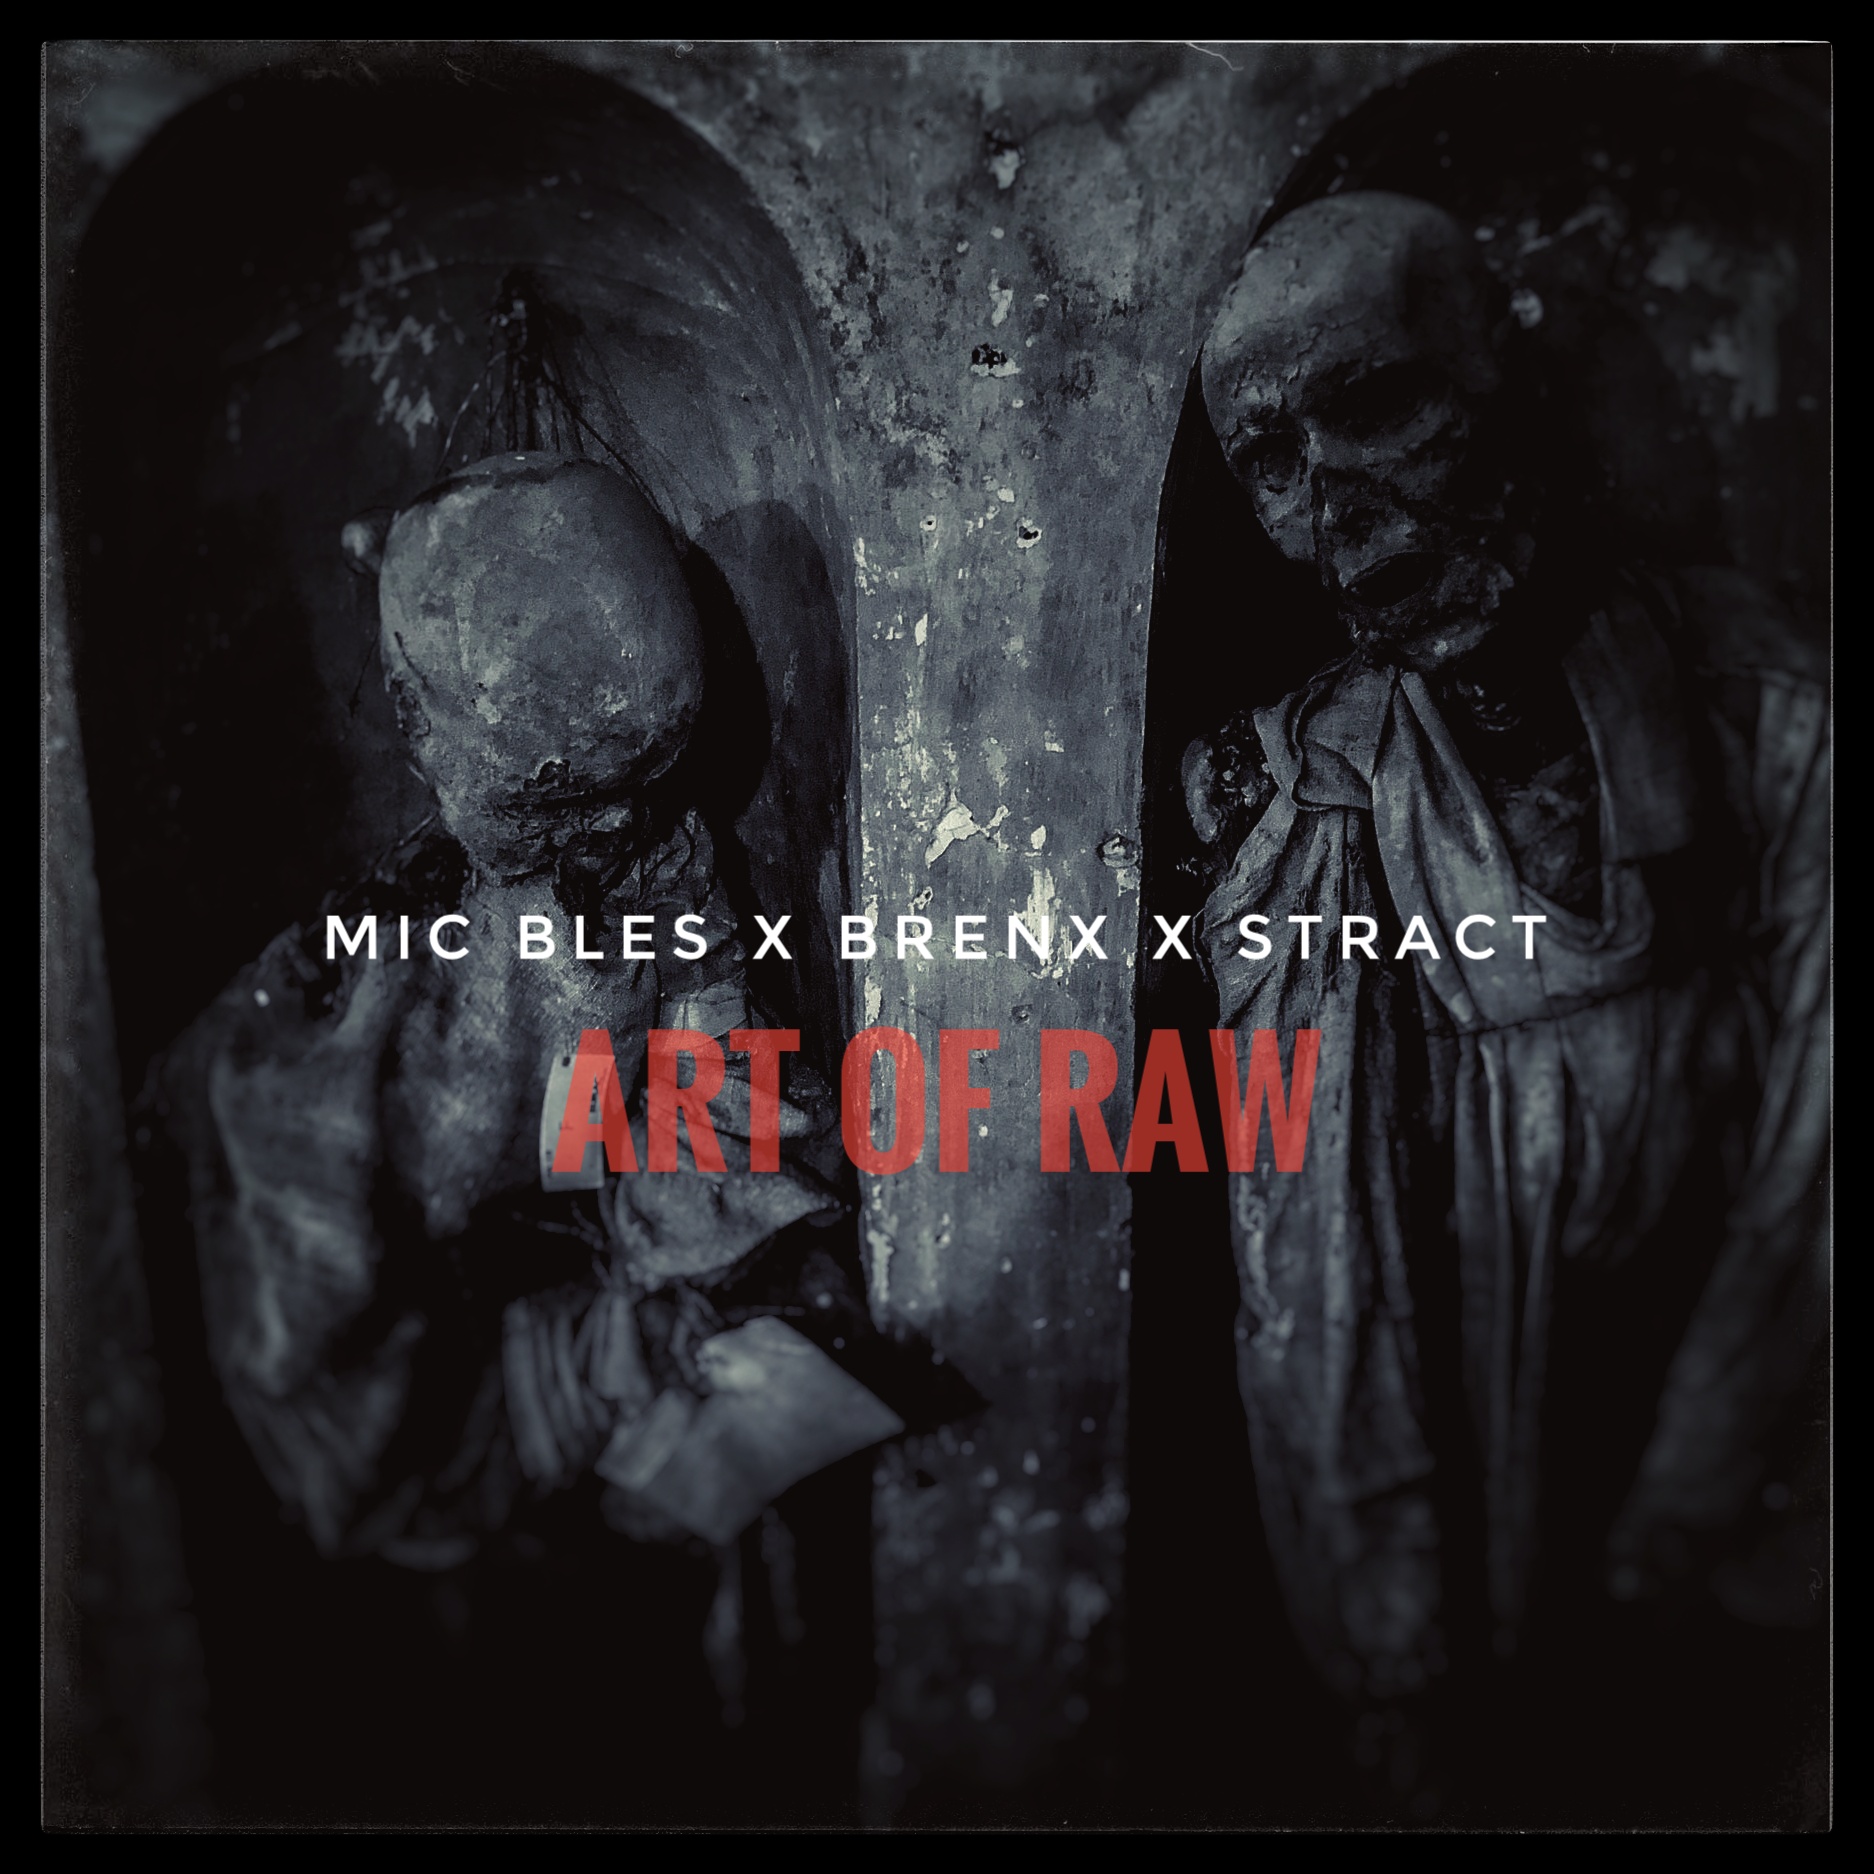 Watch The Lyric Video For Mic Bles & Brenx’s “Art Of Raw” feat. Stract